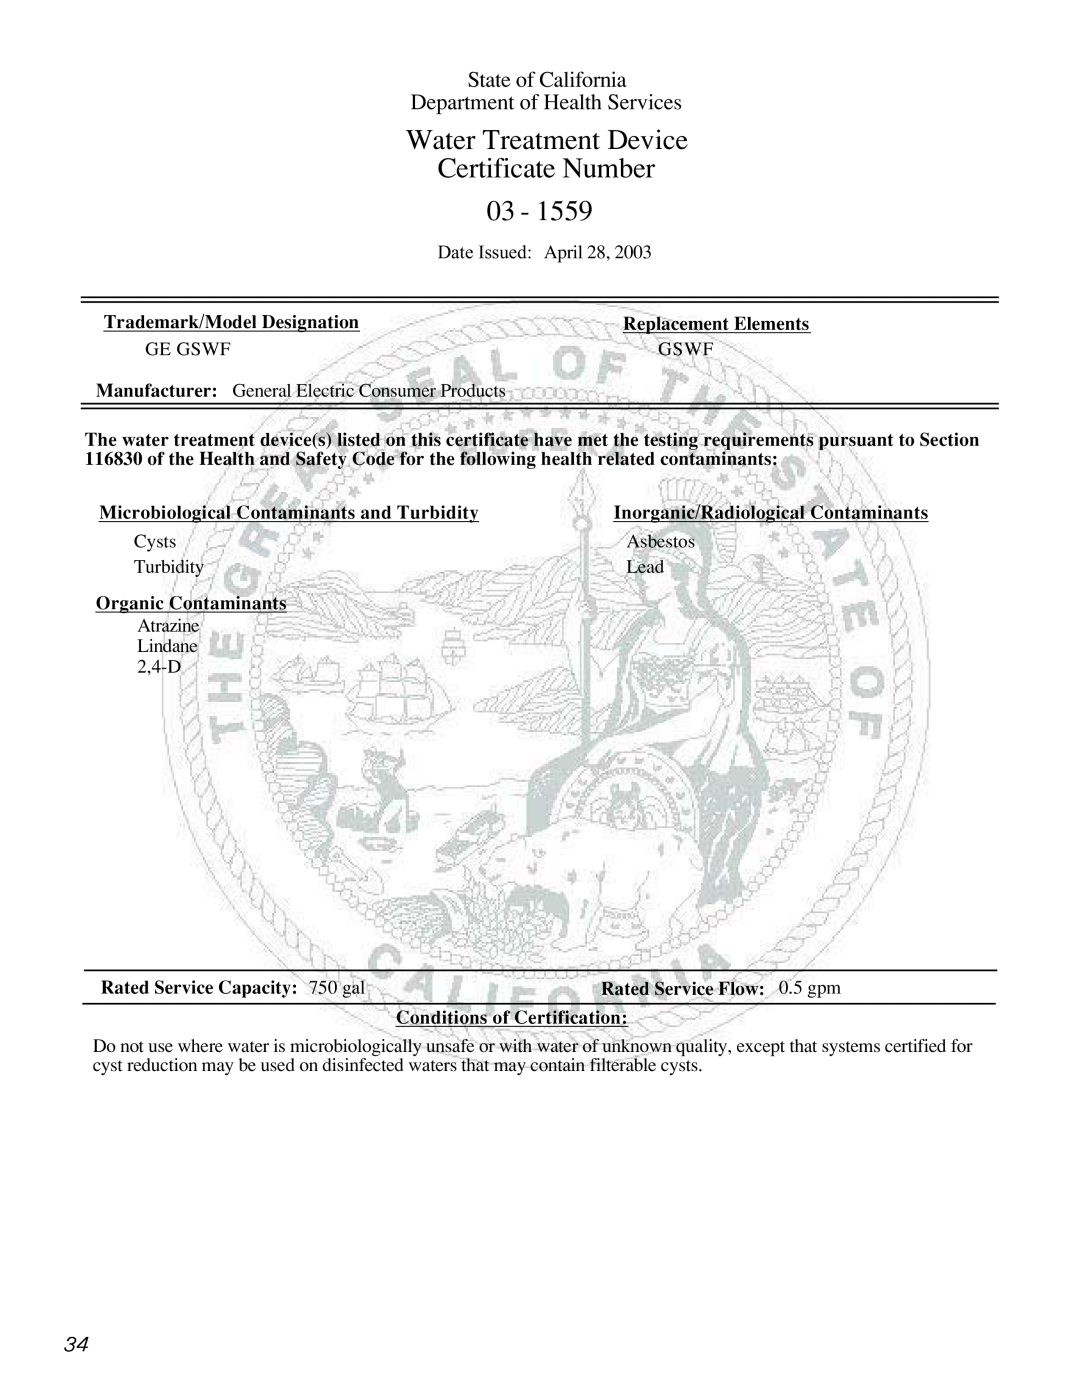 GE 18, 19 State of California, Department of Health Services, Water Treatment Device, Certificate Number 